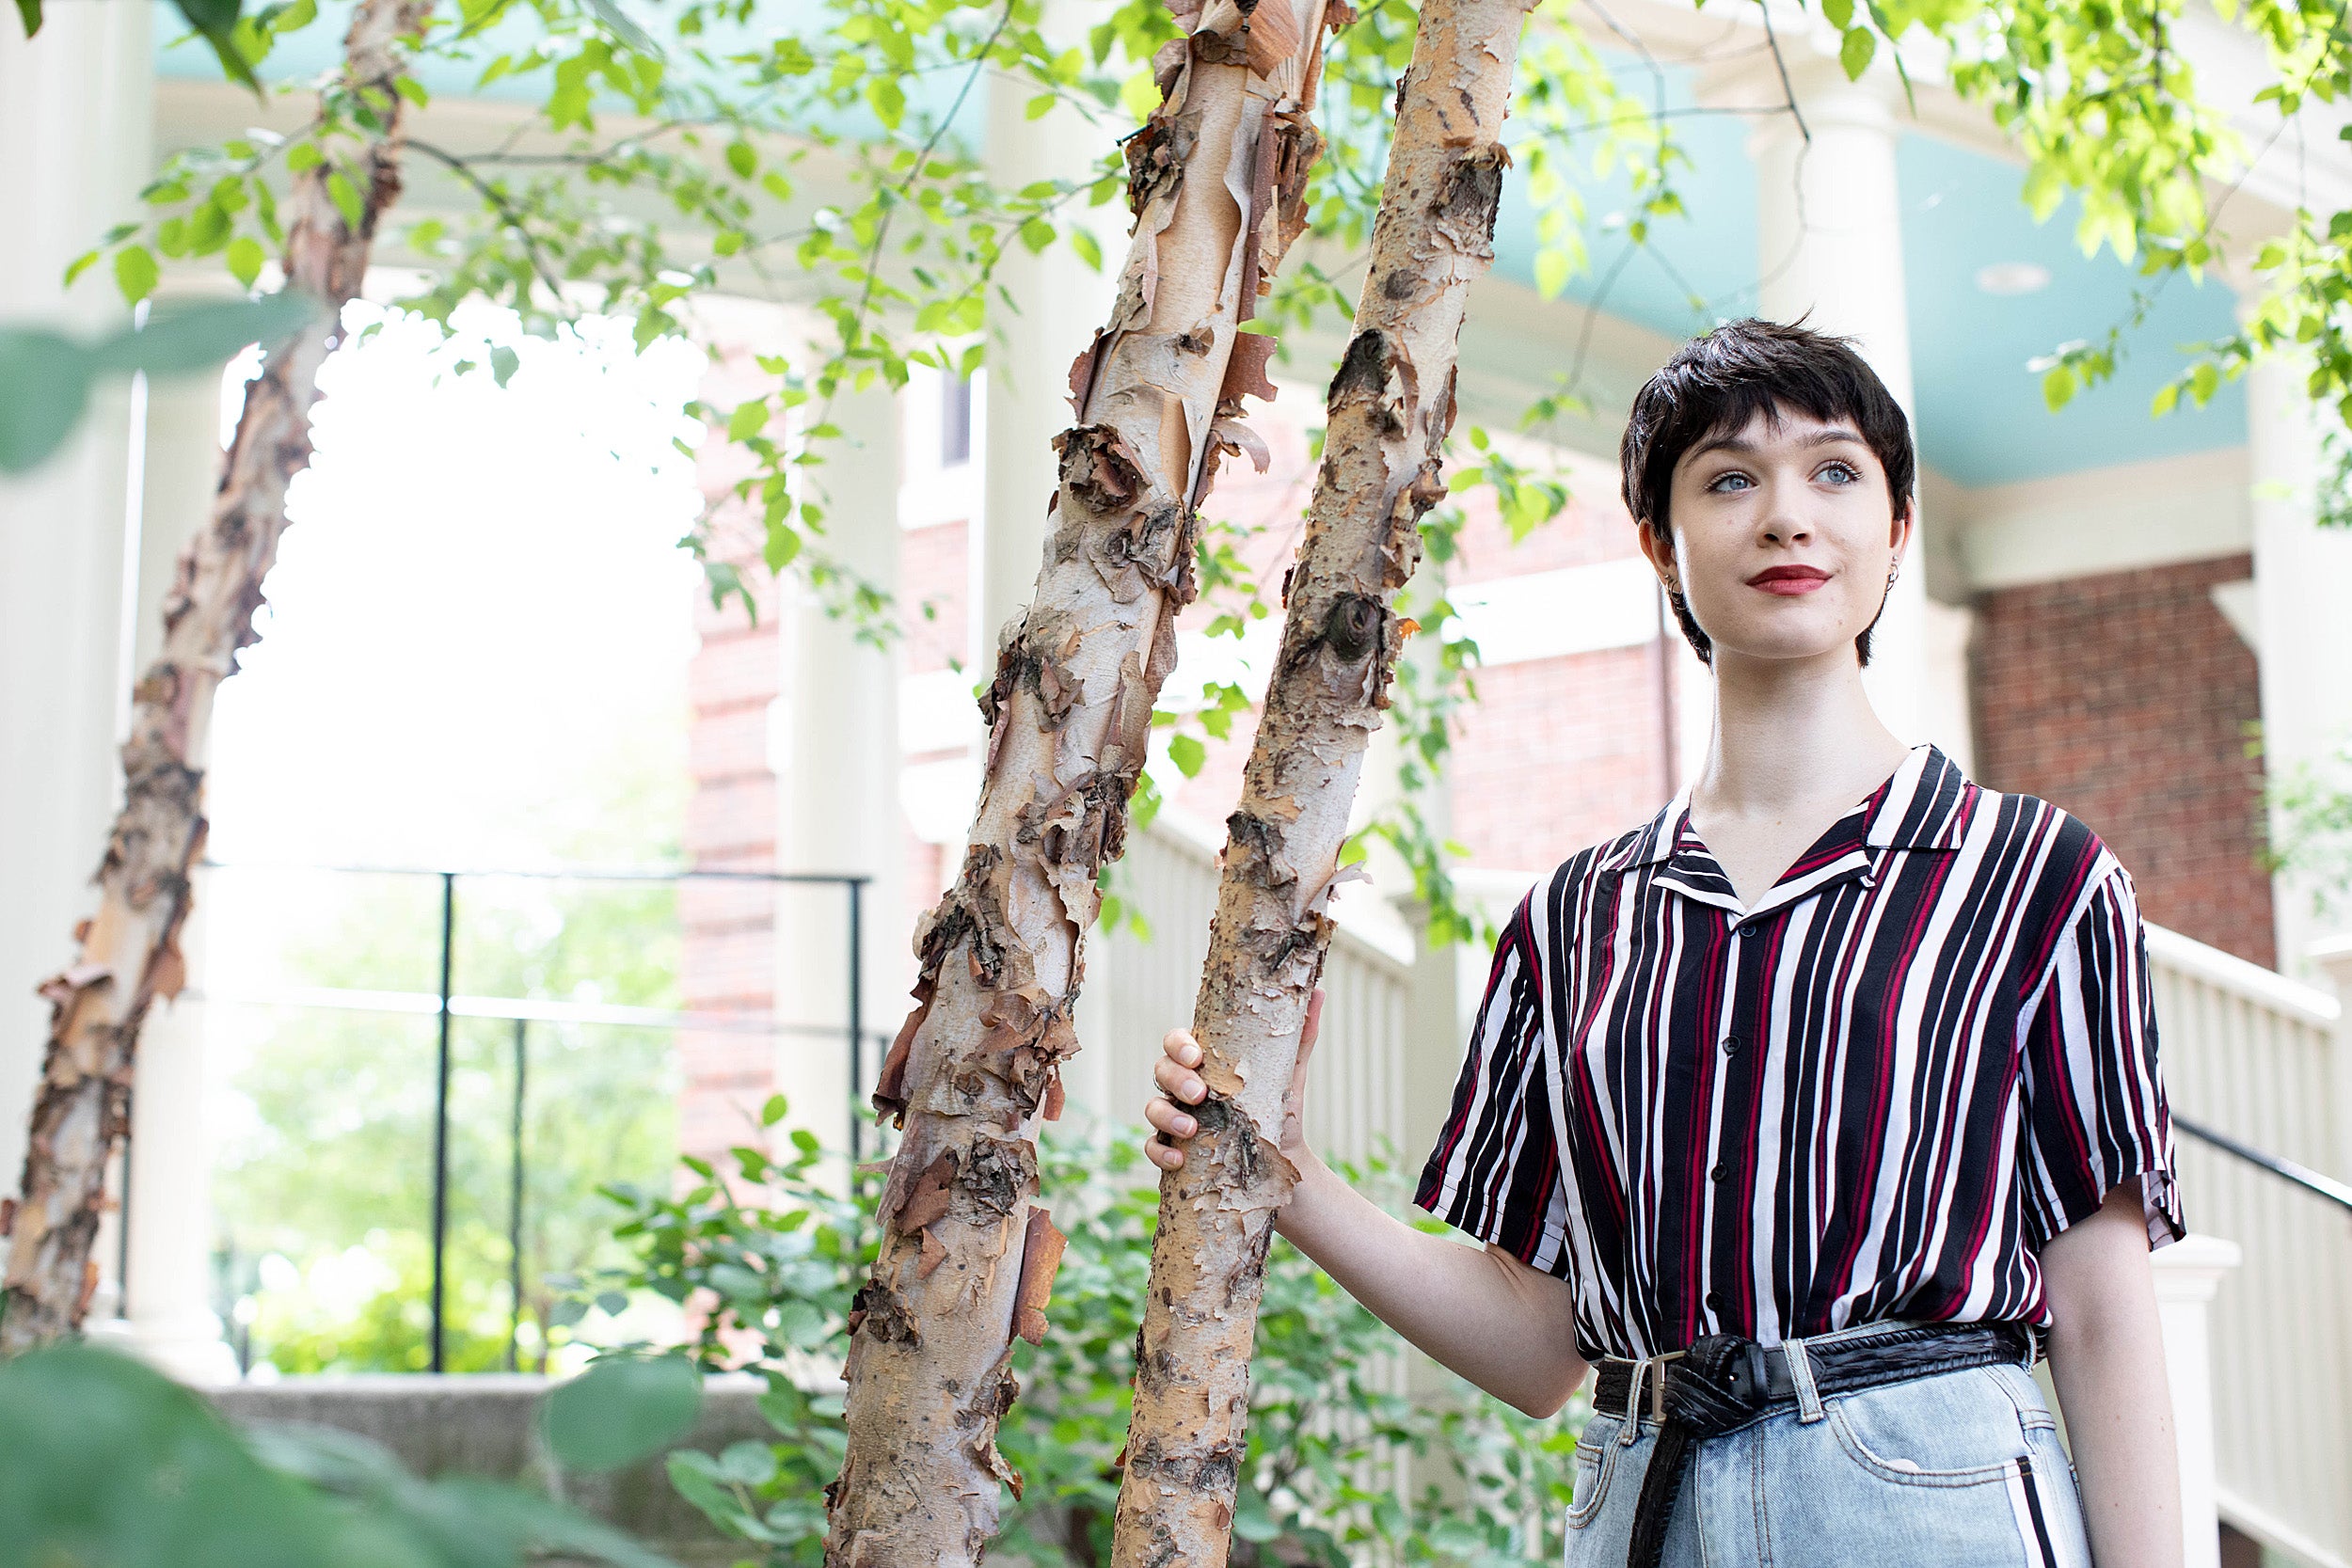 student in a striped shirt next to a tree